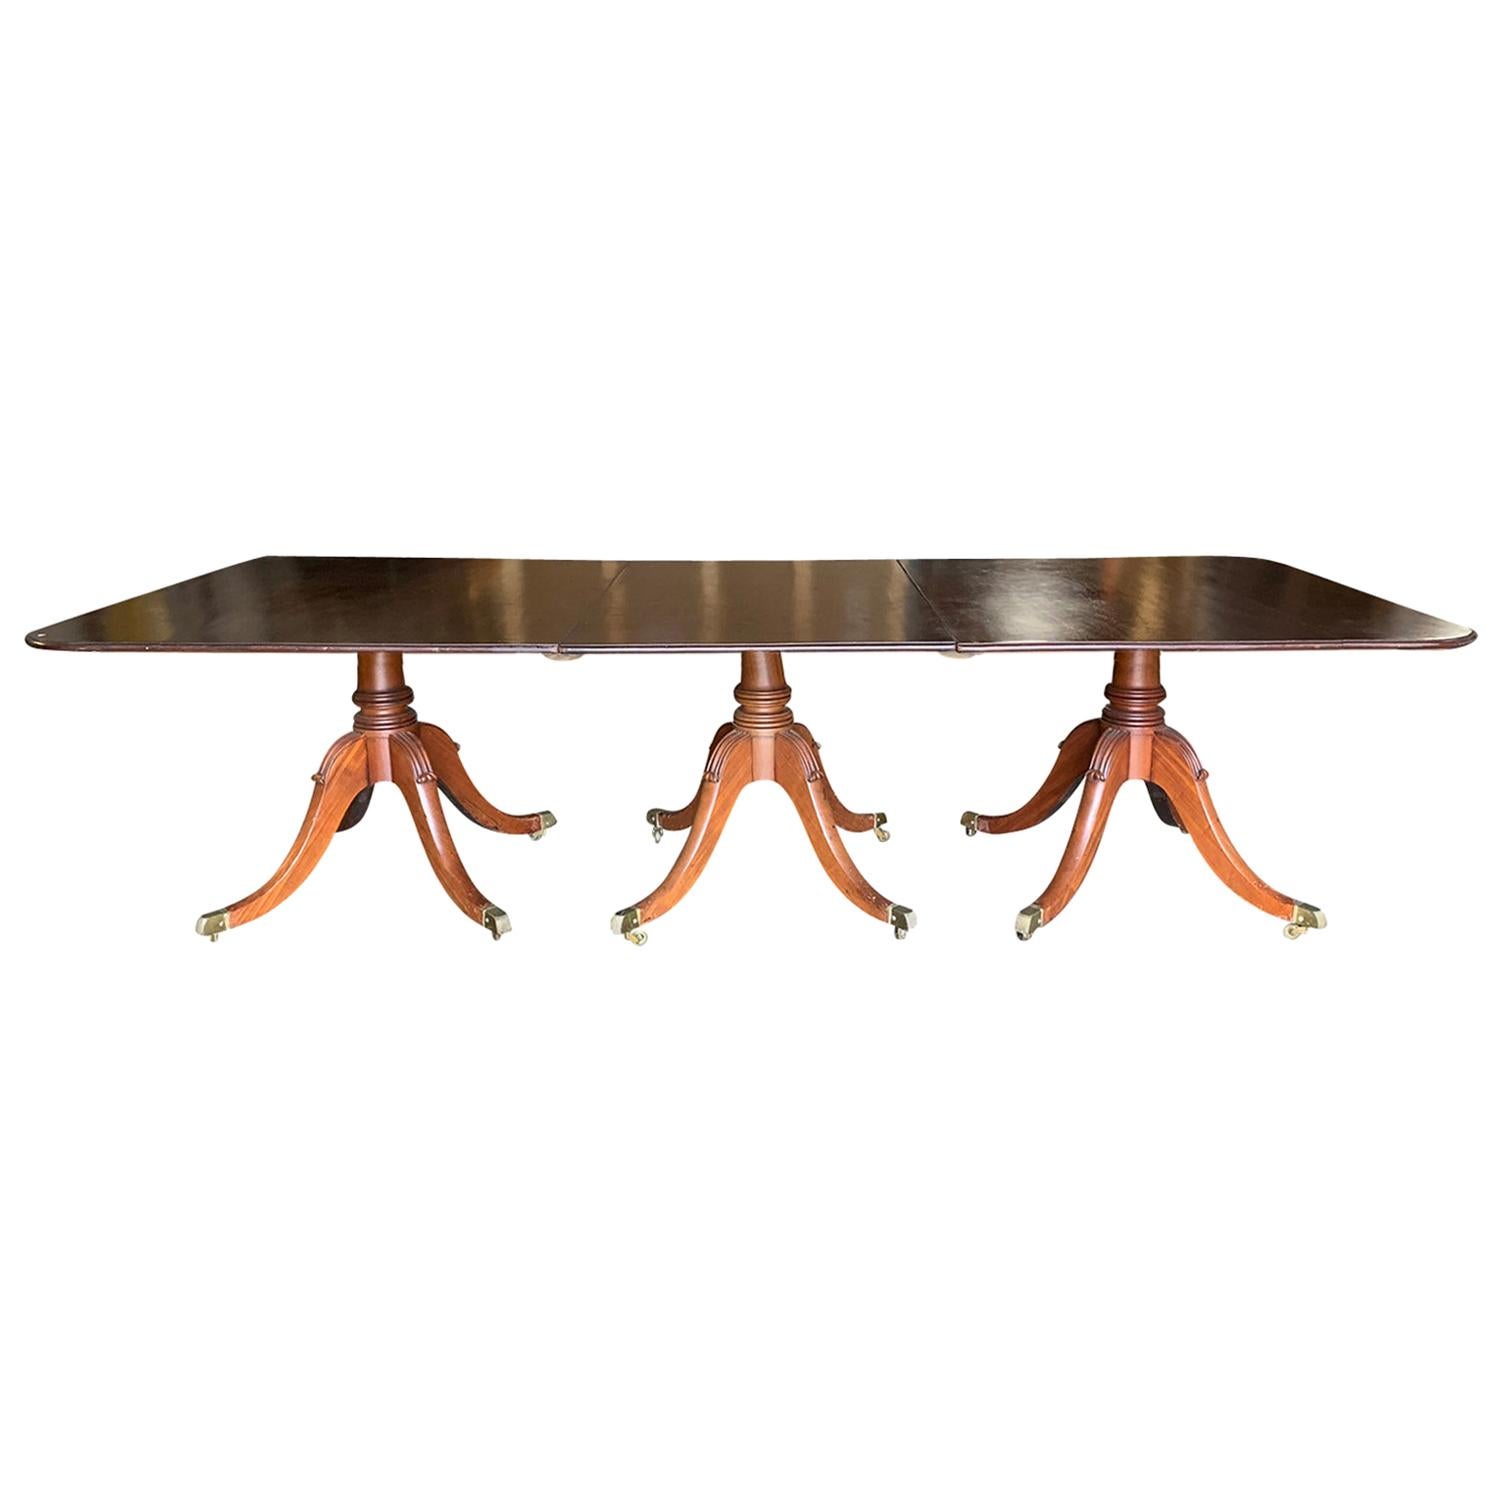 19th Century Regency Style Triple Pedestal Dining Table with Three Leaves